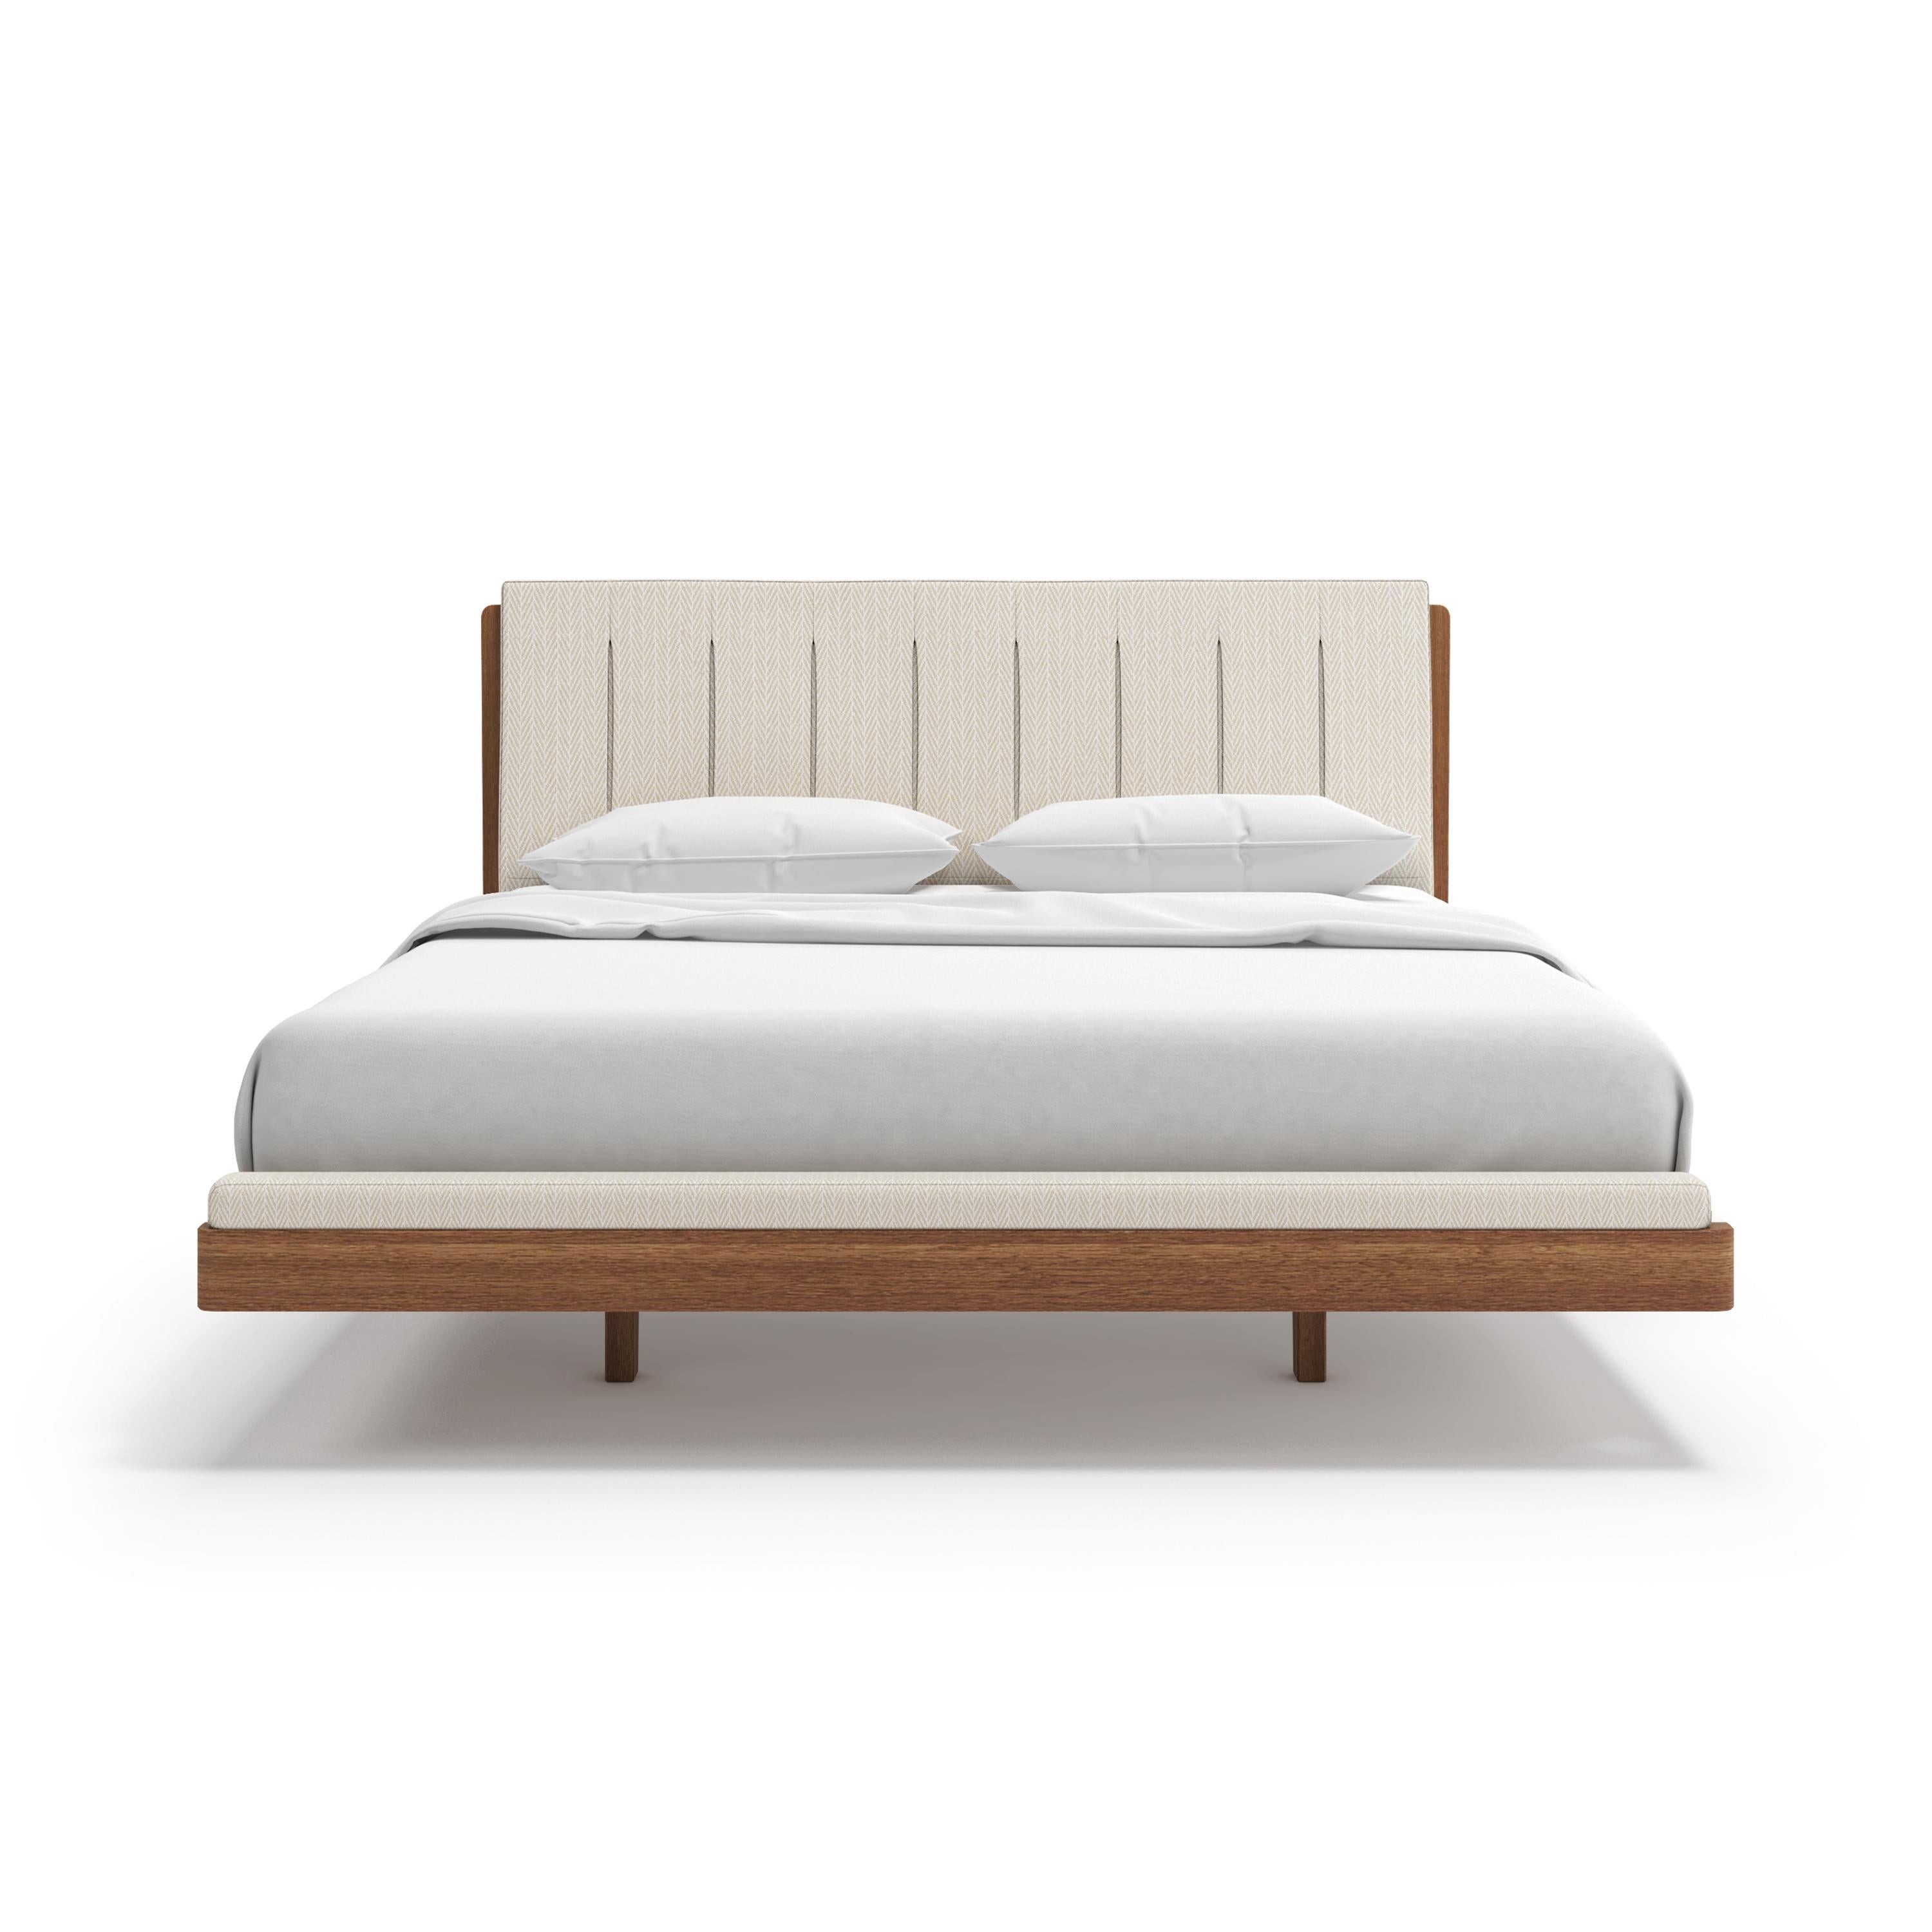 Experience superior comfort and craftsmanship with the Talvi Bed! Made from solid oak or teak wood, this beautiful bed will bring a sense of beauty to your room. Enjoy an extraordinary sleep and stylish design.

All Tektōn pieces are made of natural